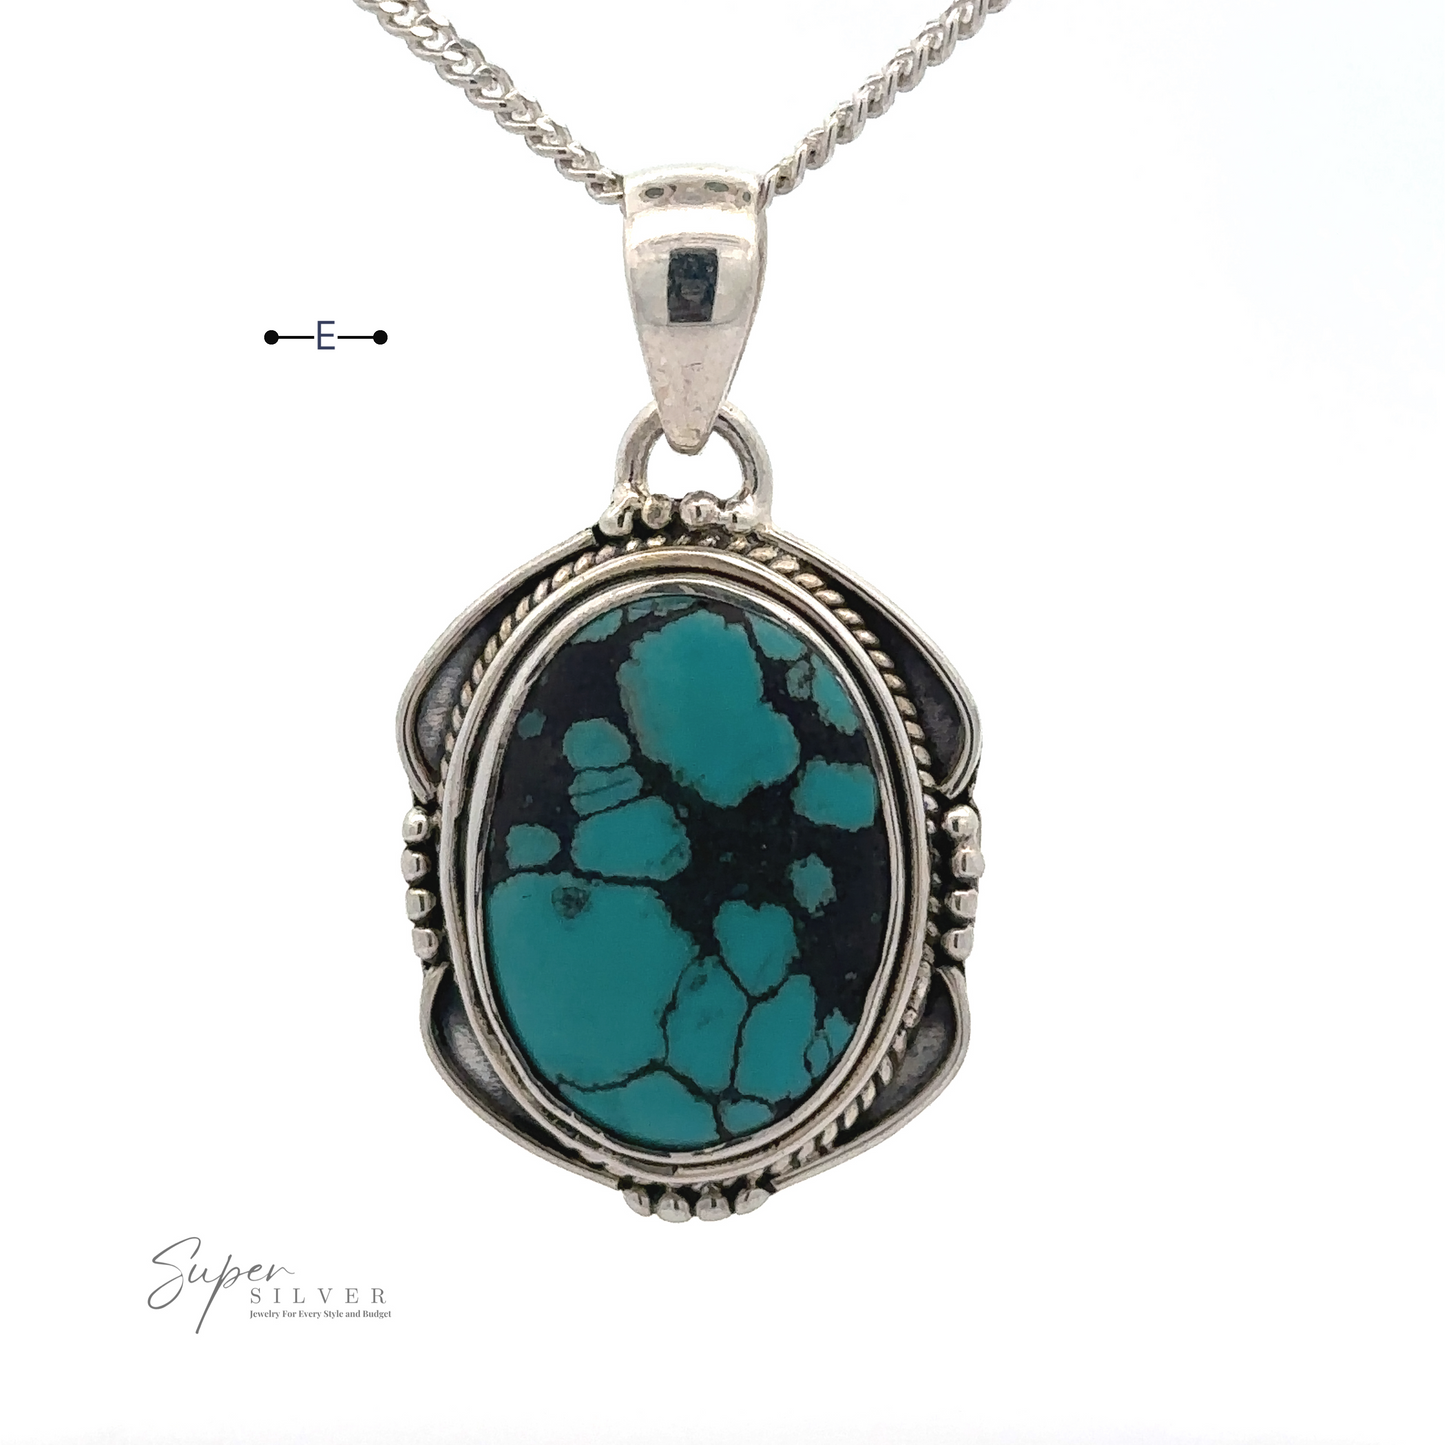 
                  
                    A Natural Turquoise Pendant with an Oval Shield Setting featuring an oval natural turquoise stone with black patterns. The pendant, crafted from sterling silver, has an intricate border design and hangs from a silver chain. "Super Silver" logo is visible in the bottom corner, emphasizing the quality of these handmade items.
                  
                